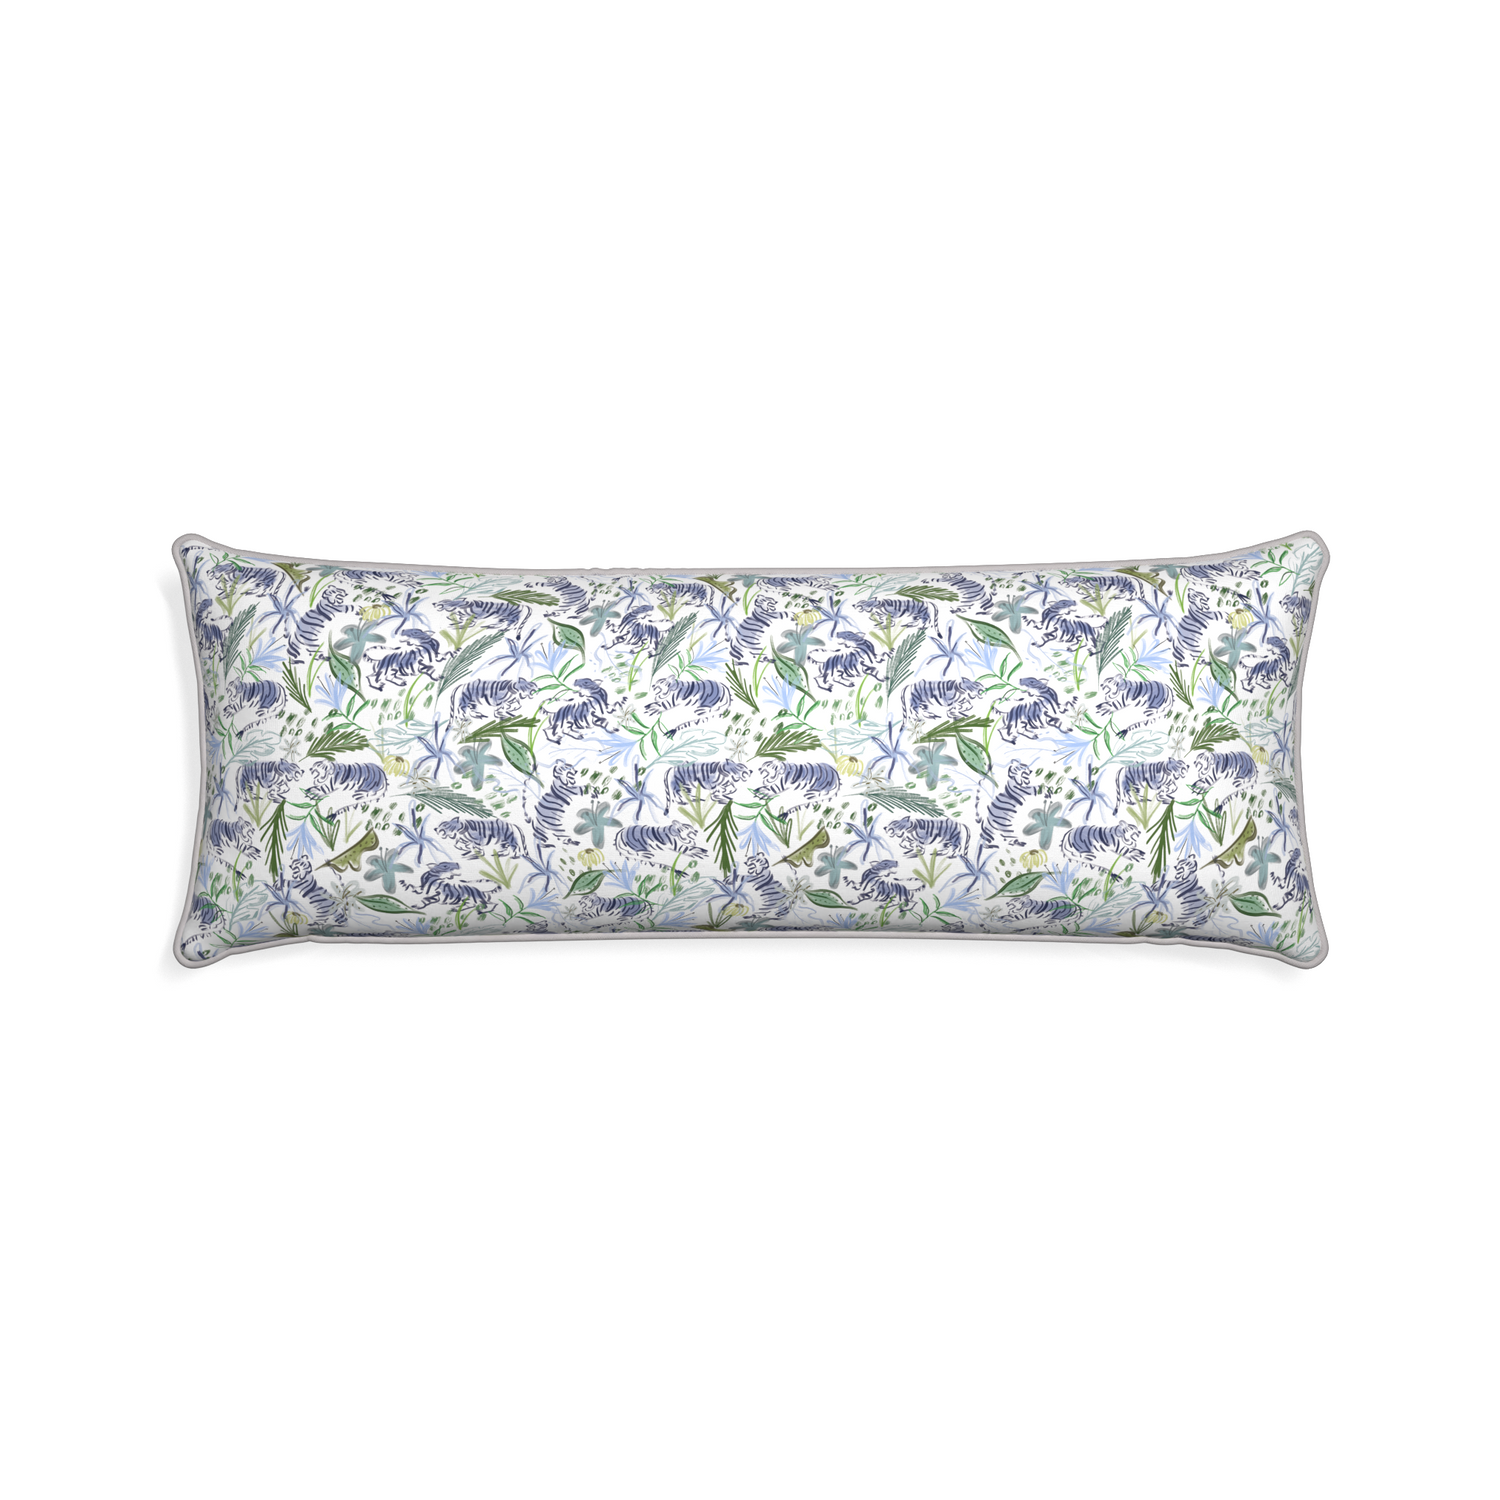 Xl-lumbar frida green custom pillow with pebble piping on white background